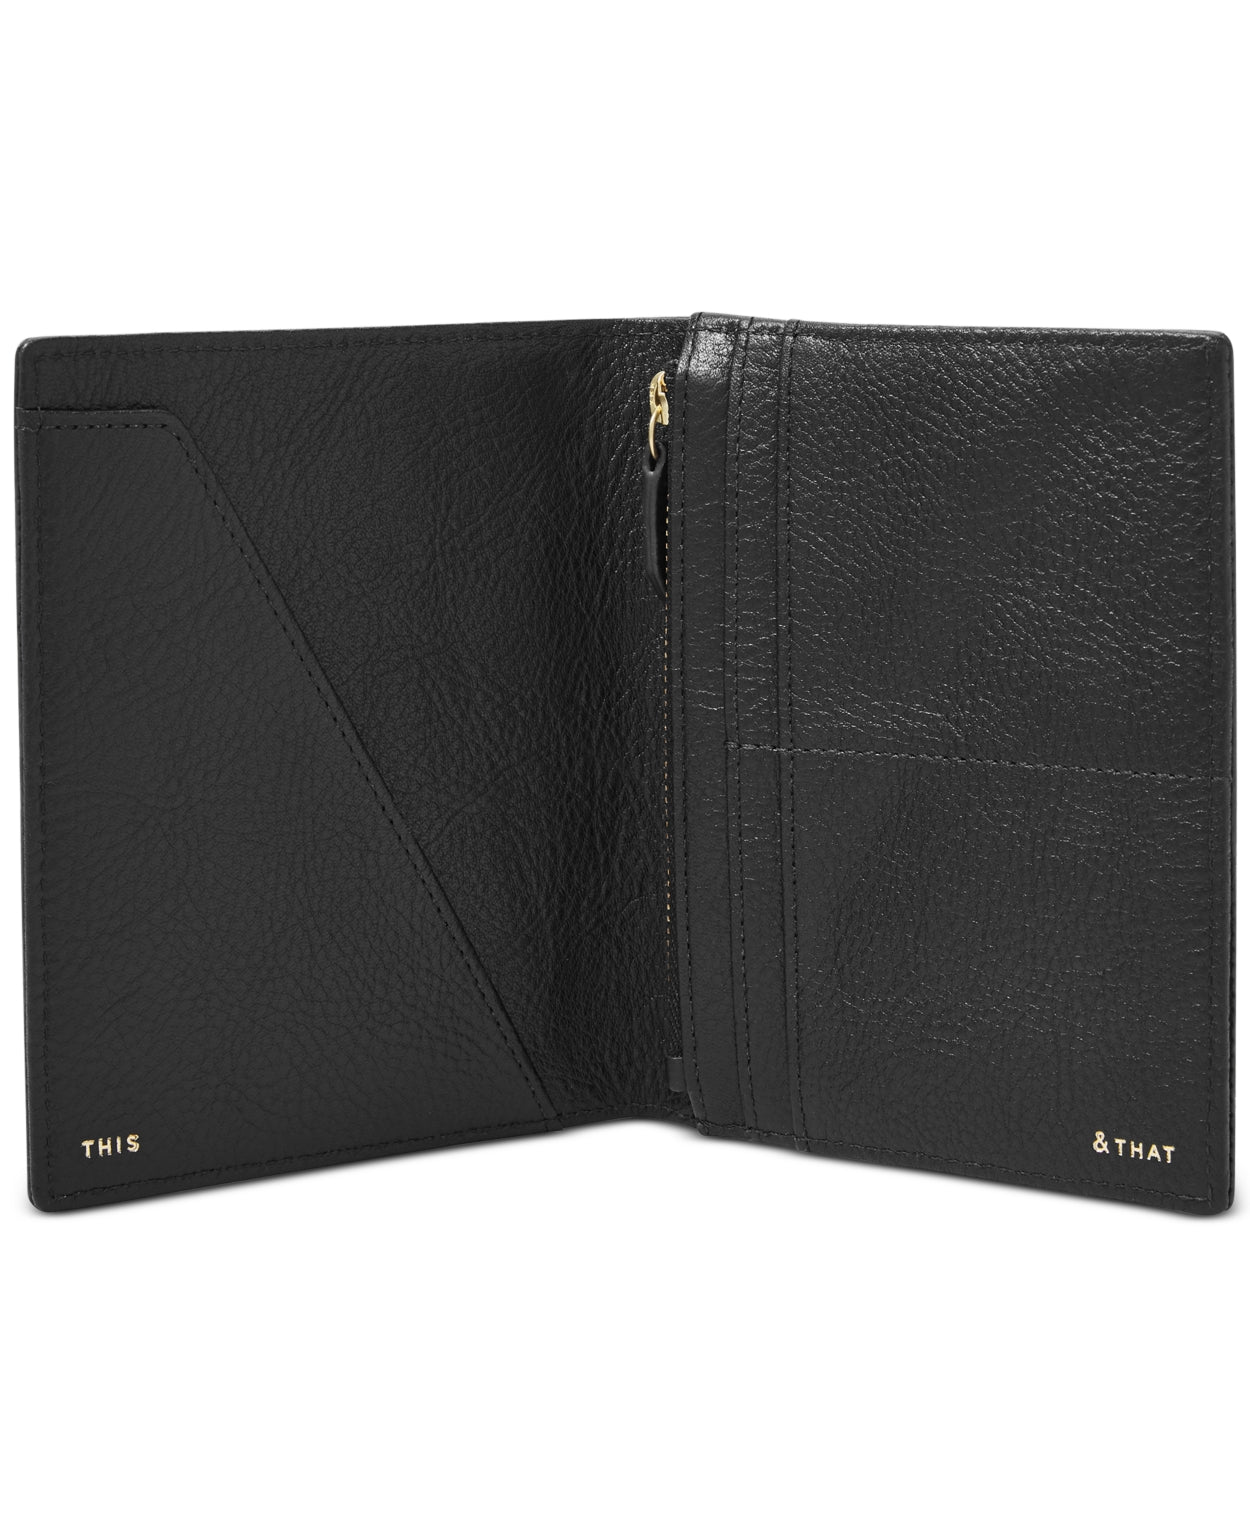 Fossil Womens Leather Travel Passport Case